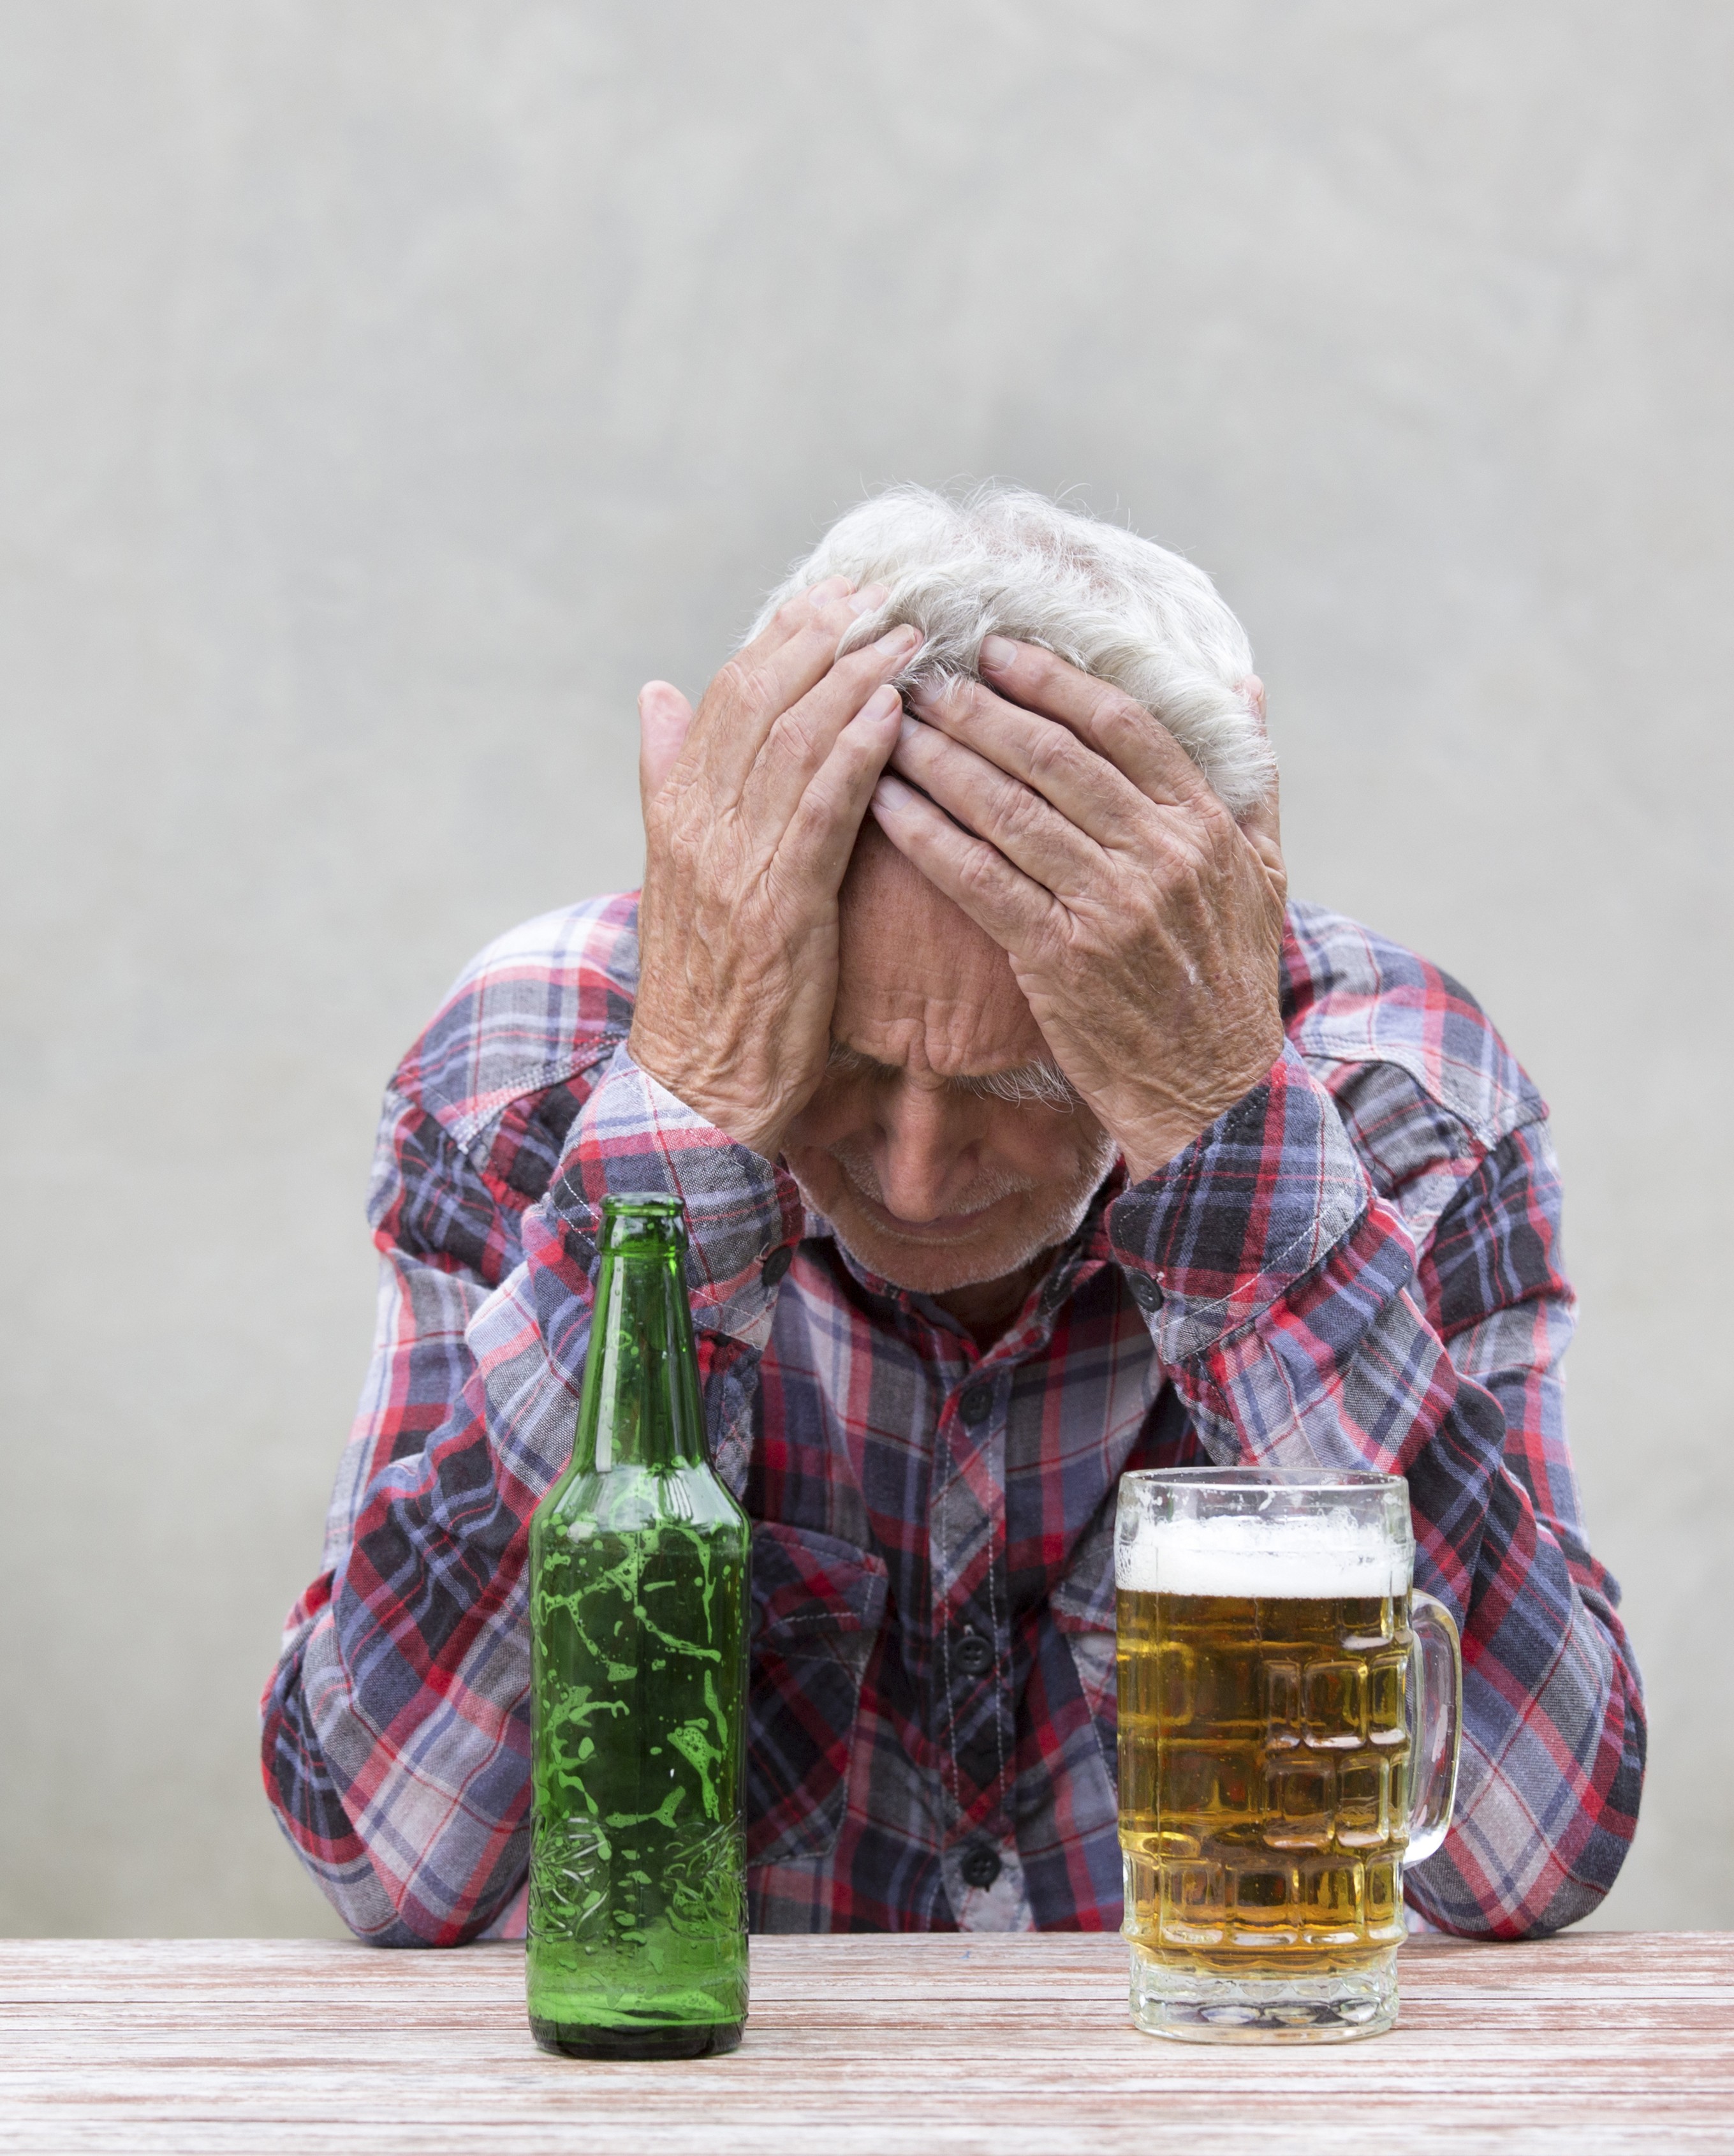 It’s a medical fact that hangovers get worse with age. Photo: Shutterstock